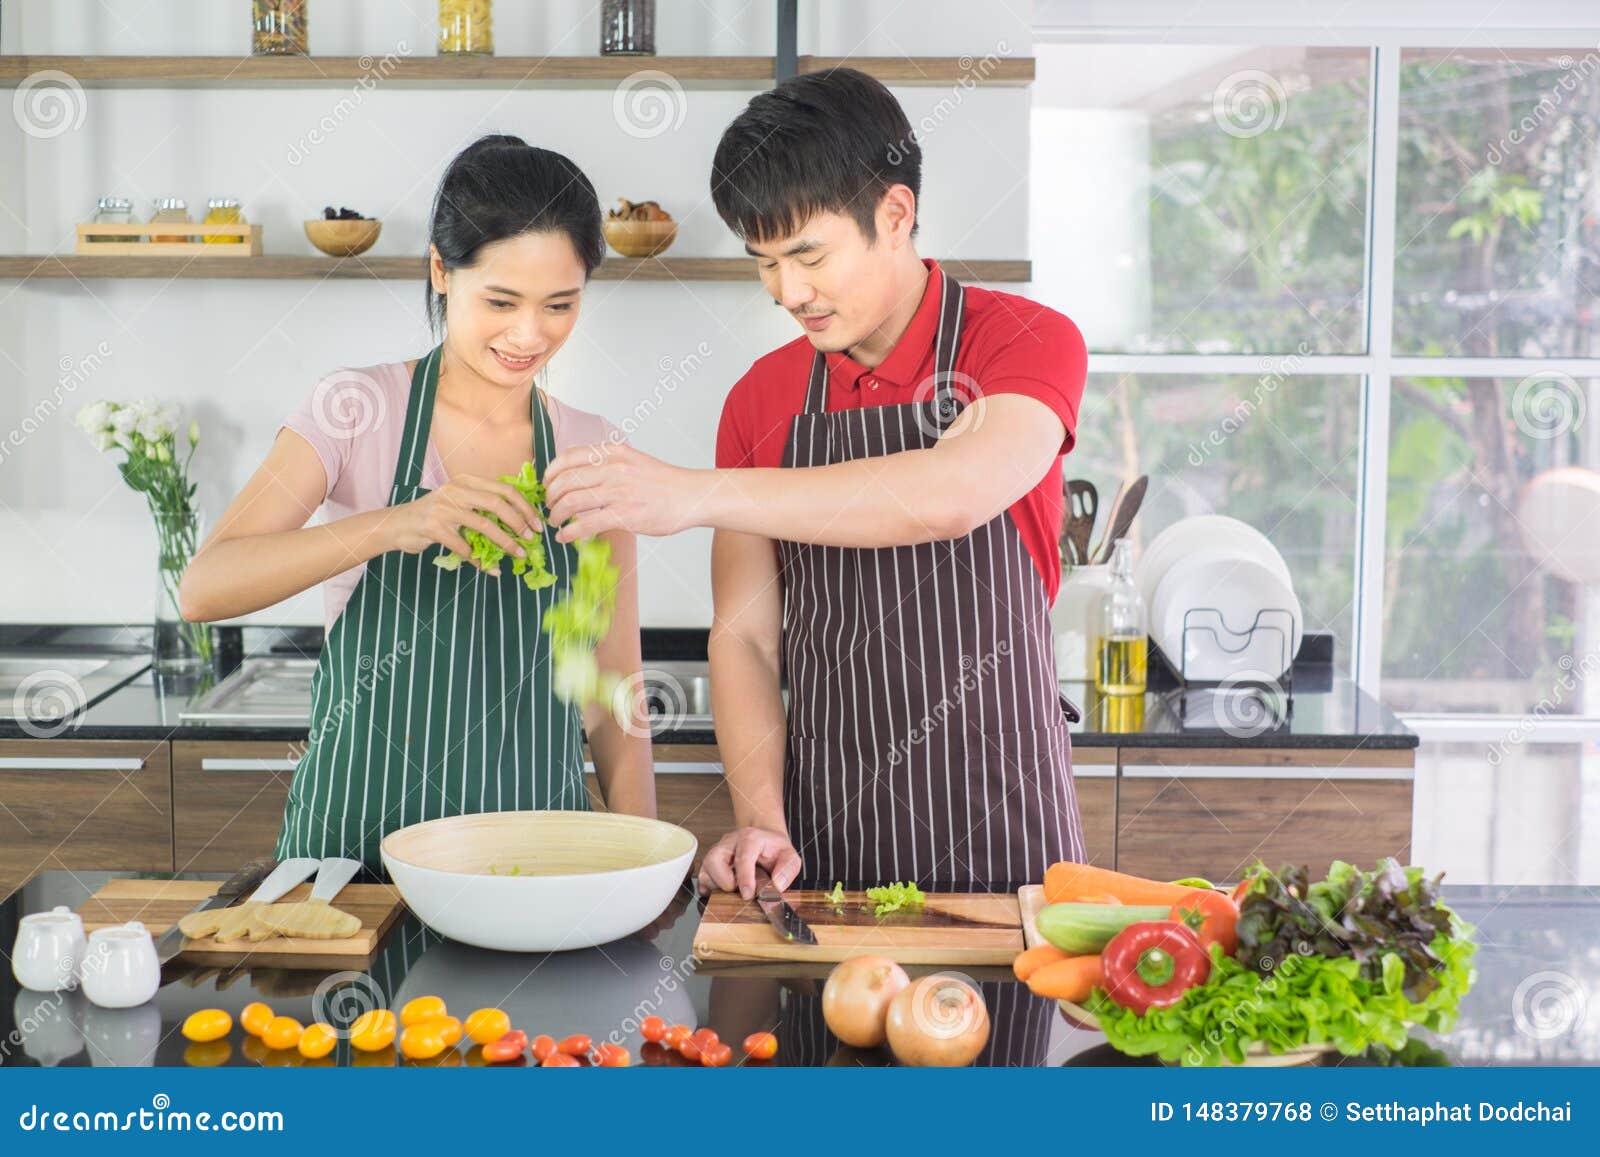 Asian Couple They Both Made A Happy Salad Together In The Kitchen At